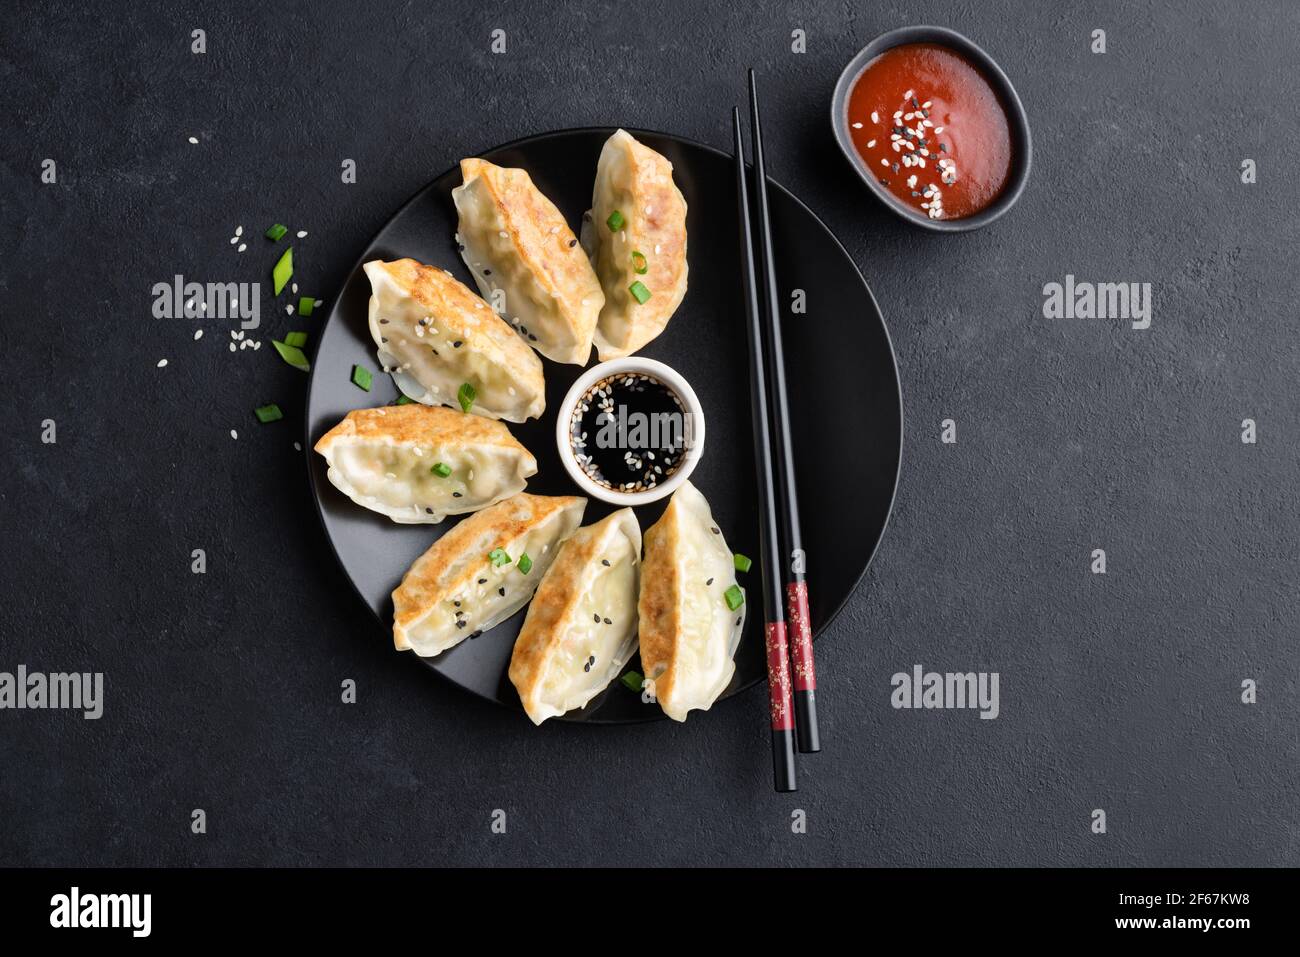 Asian food Gyoza or Jiaozi fried dumplings served with soy sauce, shriracha sauce and sesame seeds on black concrete background, top view Stock Photo